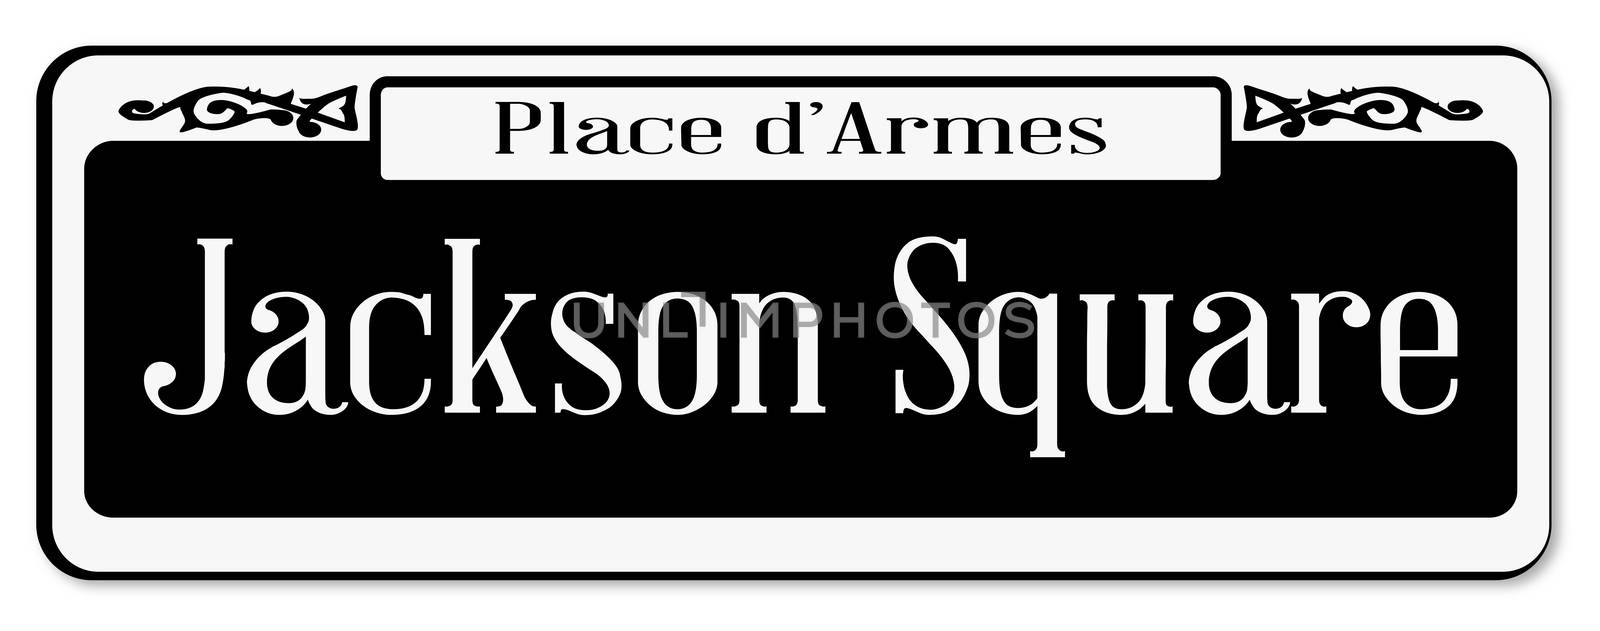 New Orleons street sign of Place d'Armes over a white background